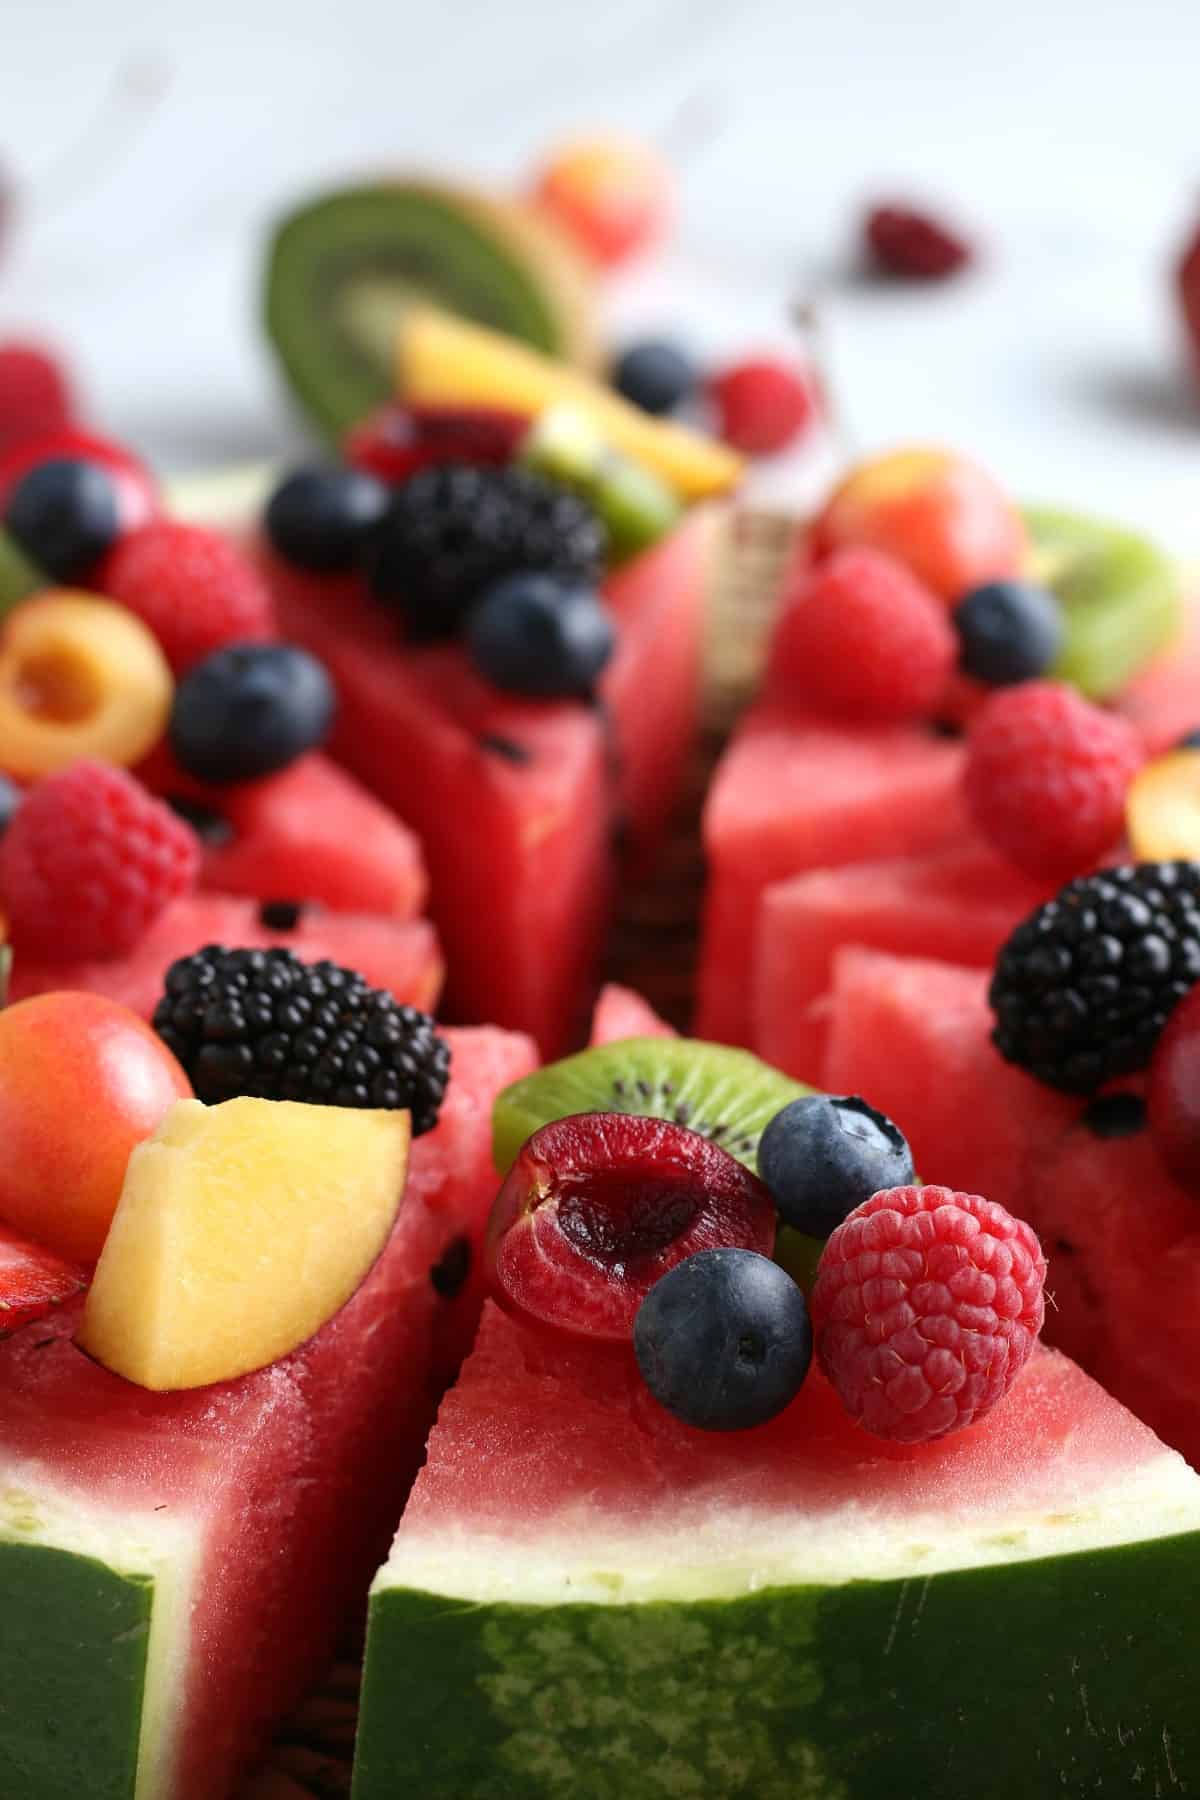 Extremely close photo of the watermelon slice angles and loaded with peaches and berries.